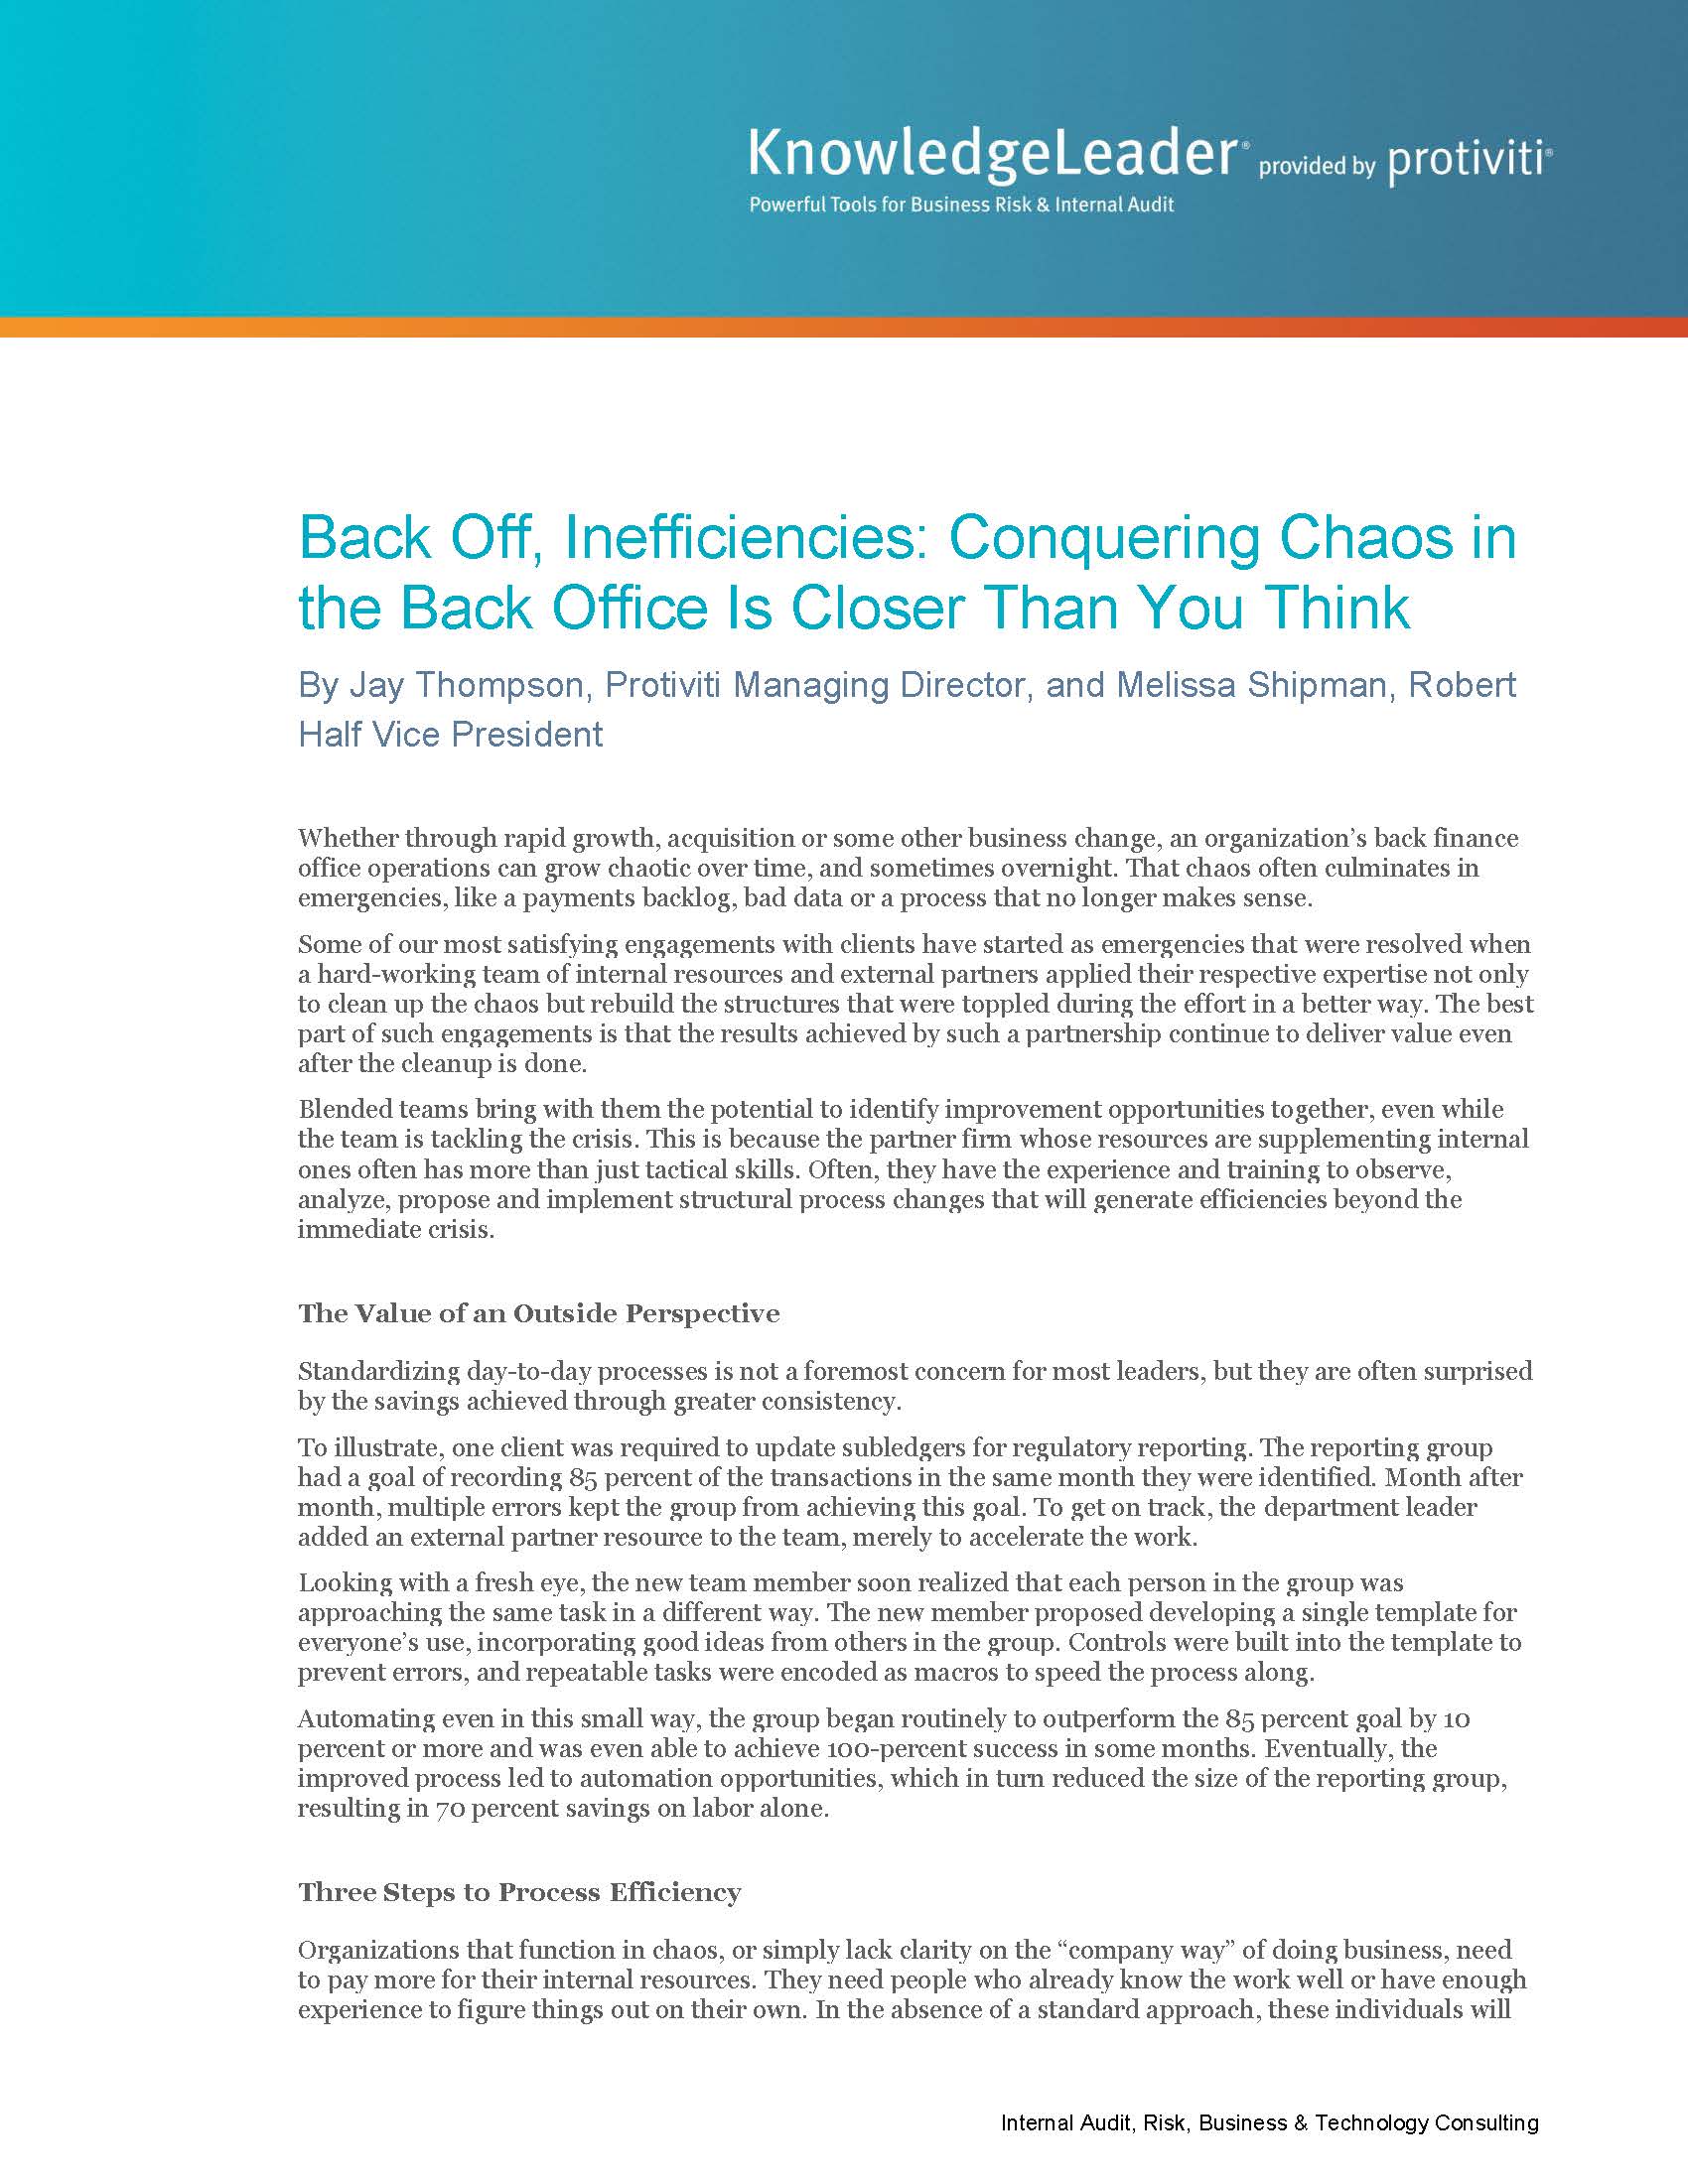 Screenshot of the first page of Back Off, Inefficiencies Conquering Chaos in the Back Office Is Closer Than You Think